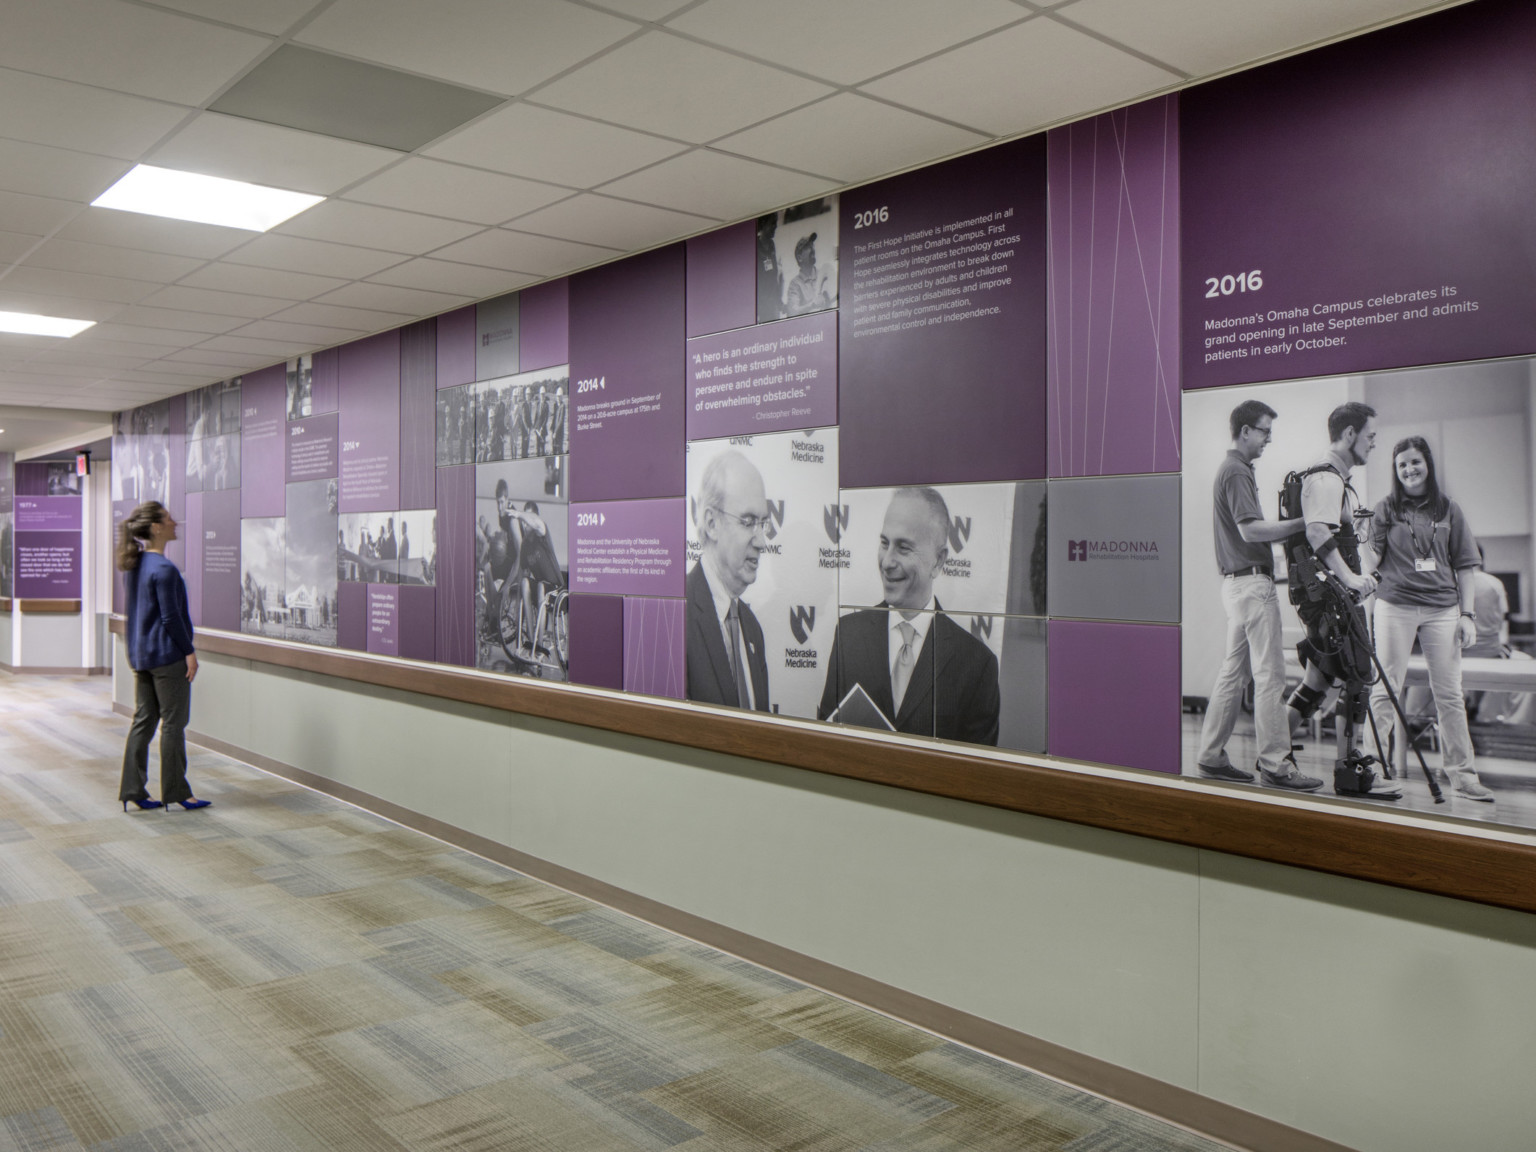 Carpeted hallway with mural on top half on wall. Mural shows timeline on purple panels among black and white photos